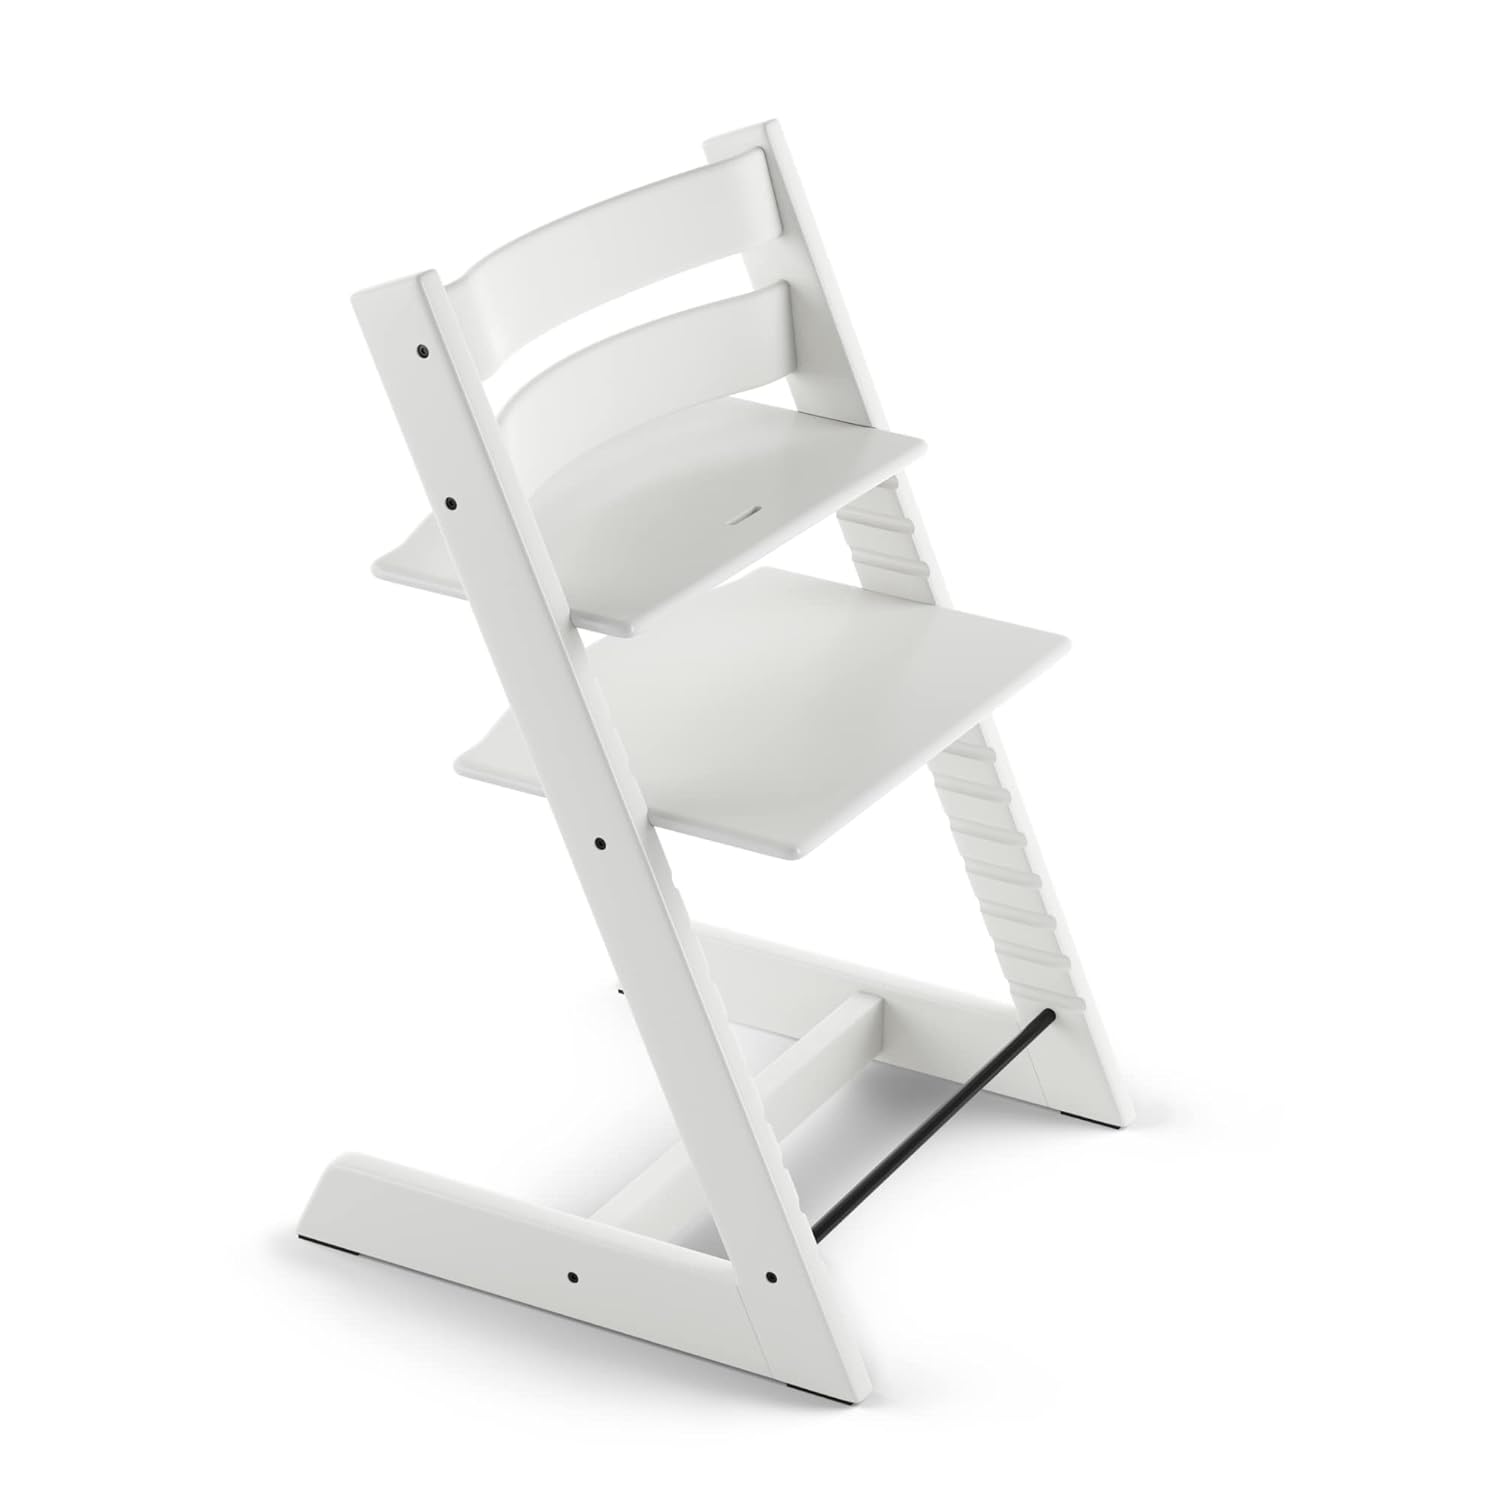 Stokke Tripp Trapp Chair from Stokke, Adjustable, Convertible Chair